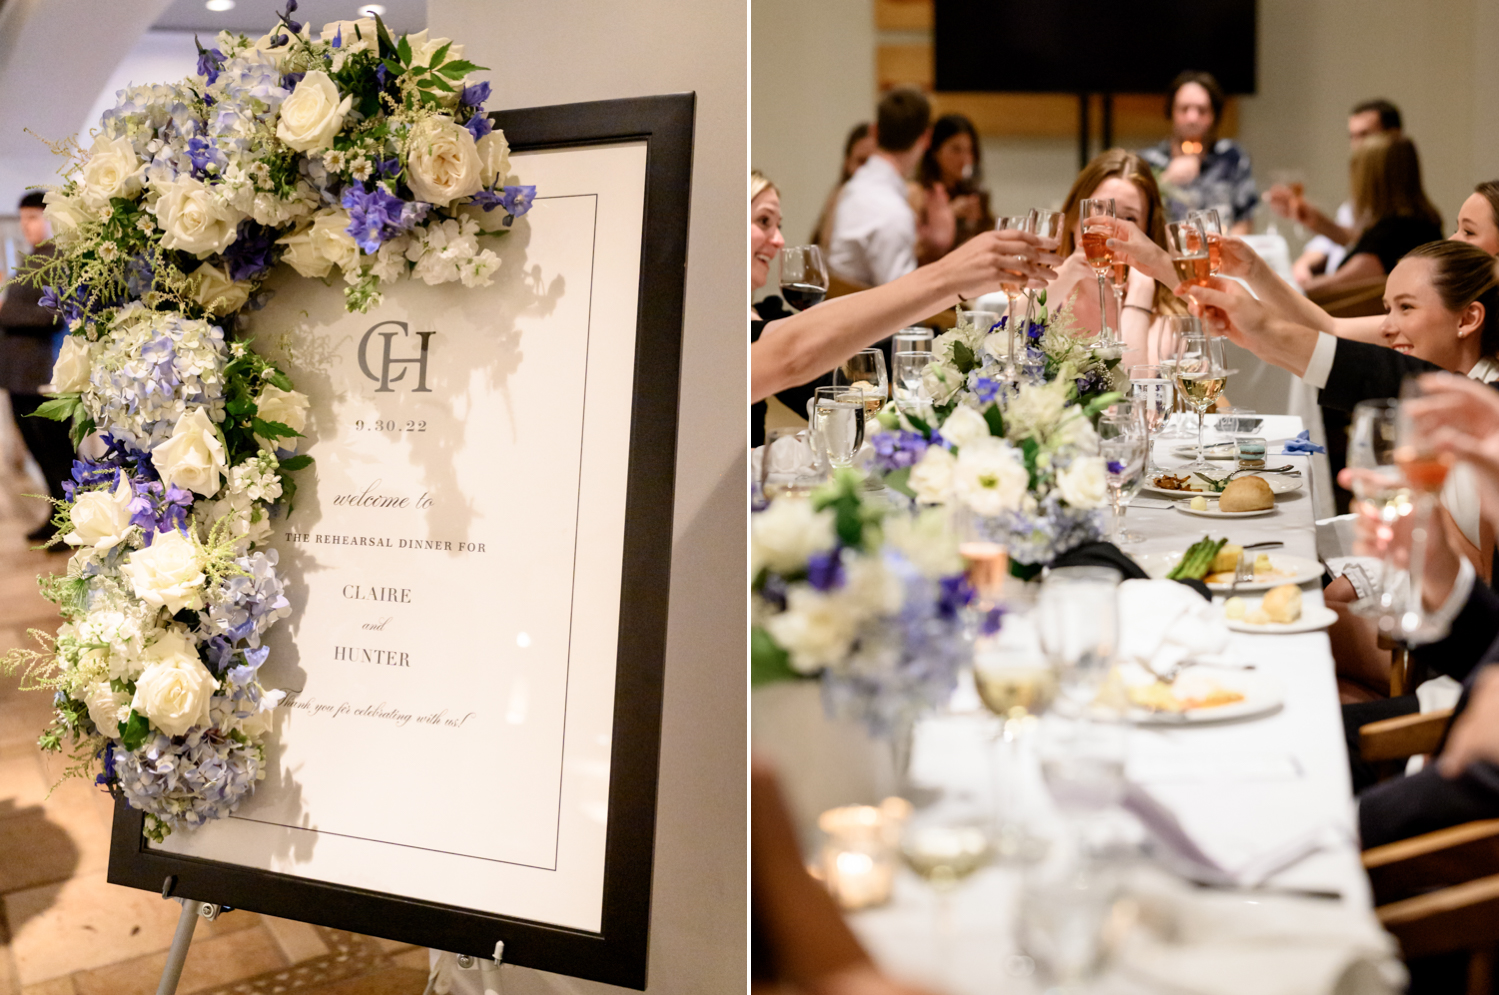 Left: The couple's welcome sign at the rehearsal dinner. Flowers adorn the side. Right: Guests toast to the bride and groom at the rehearsal dinner.